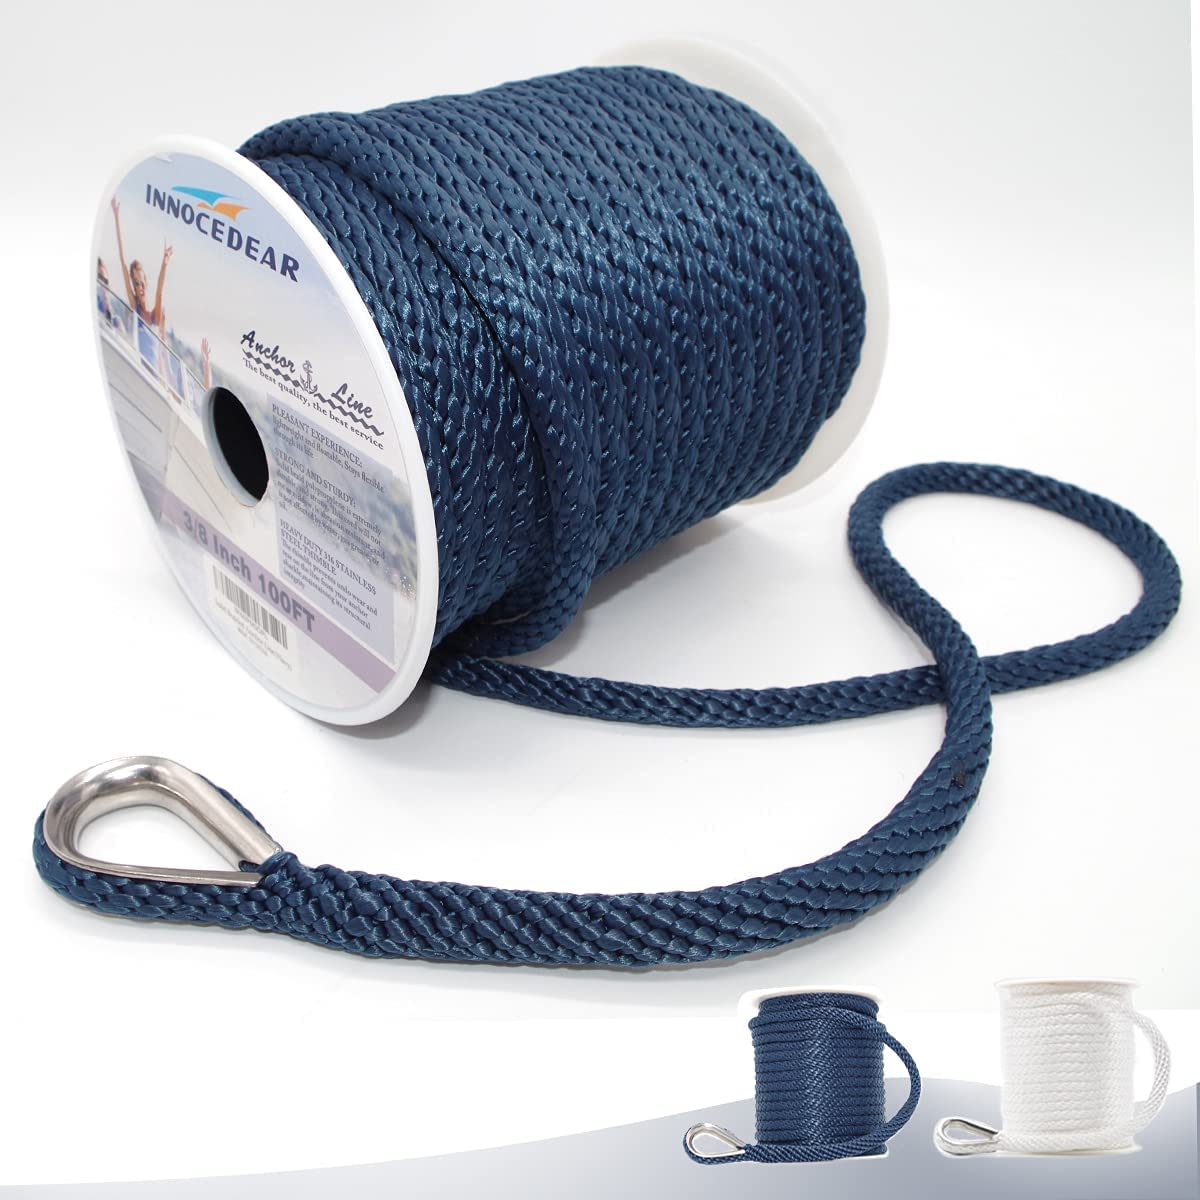 INNOCEDEAR Anchor Rope Braided Anchor Line(Navy, 3/8" x 100′) Premium Solid Braid MFP Boat Rope with Stainless Steel Thimble, Quality Marine Rope, Boat Accessories